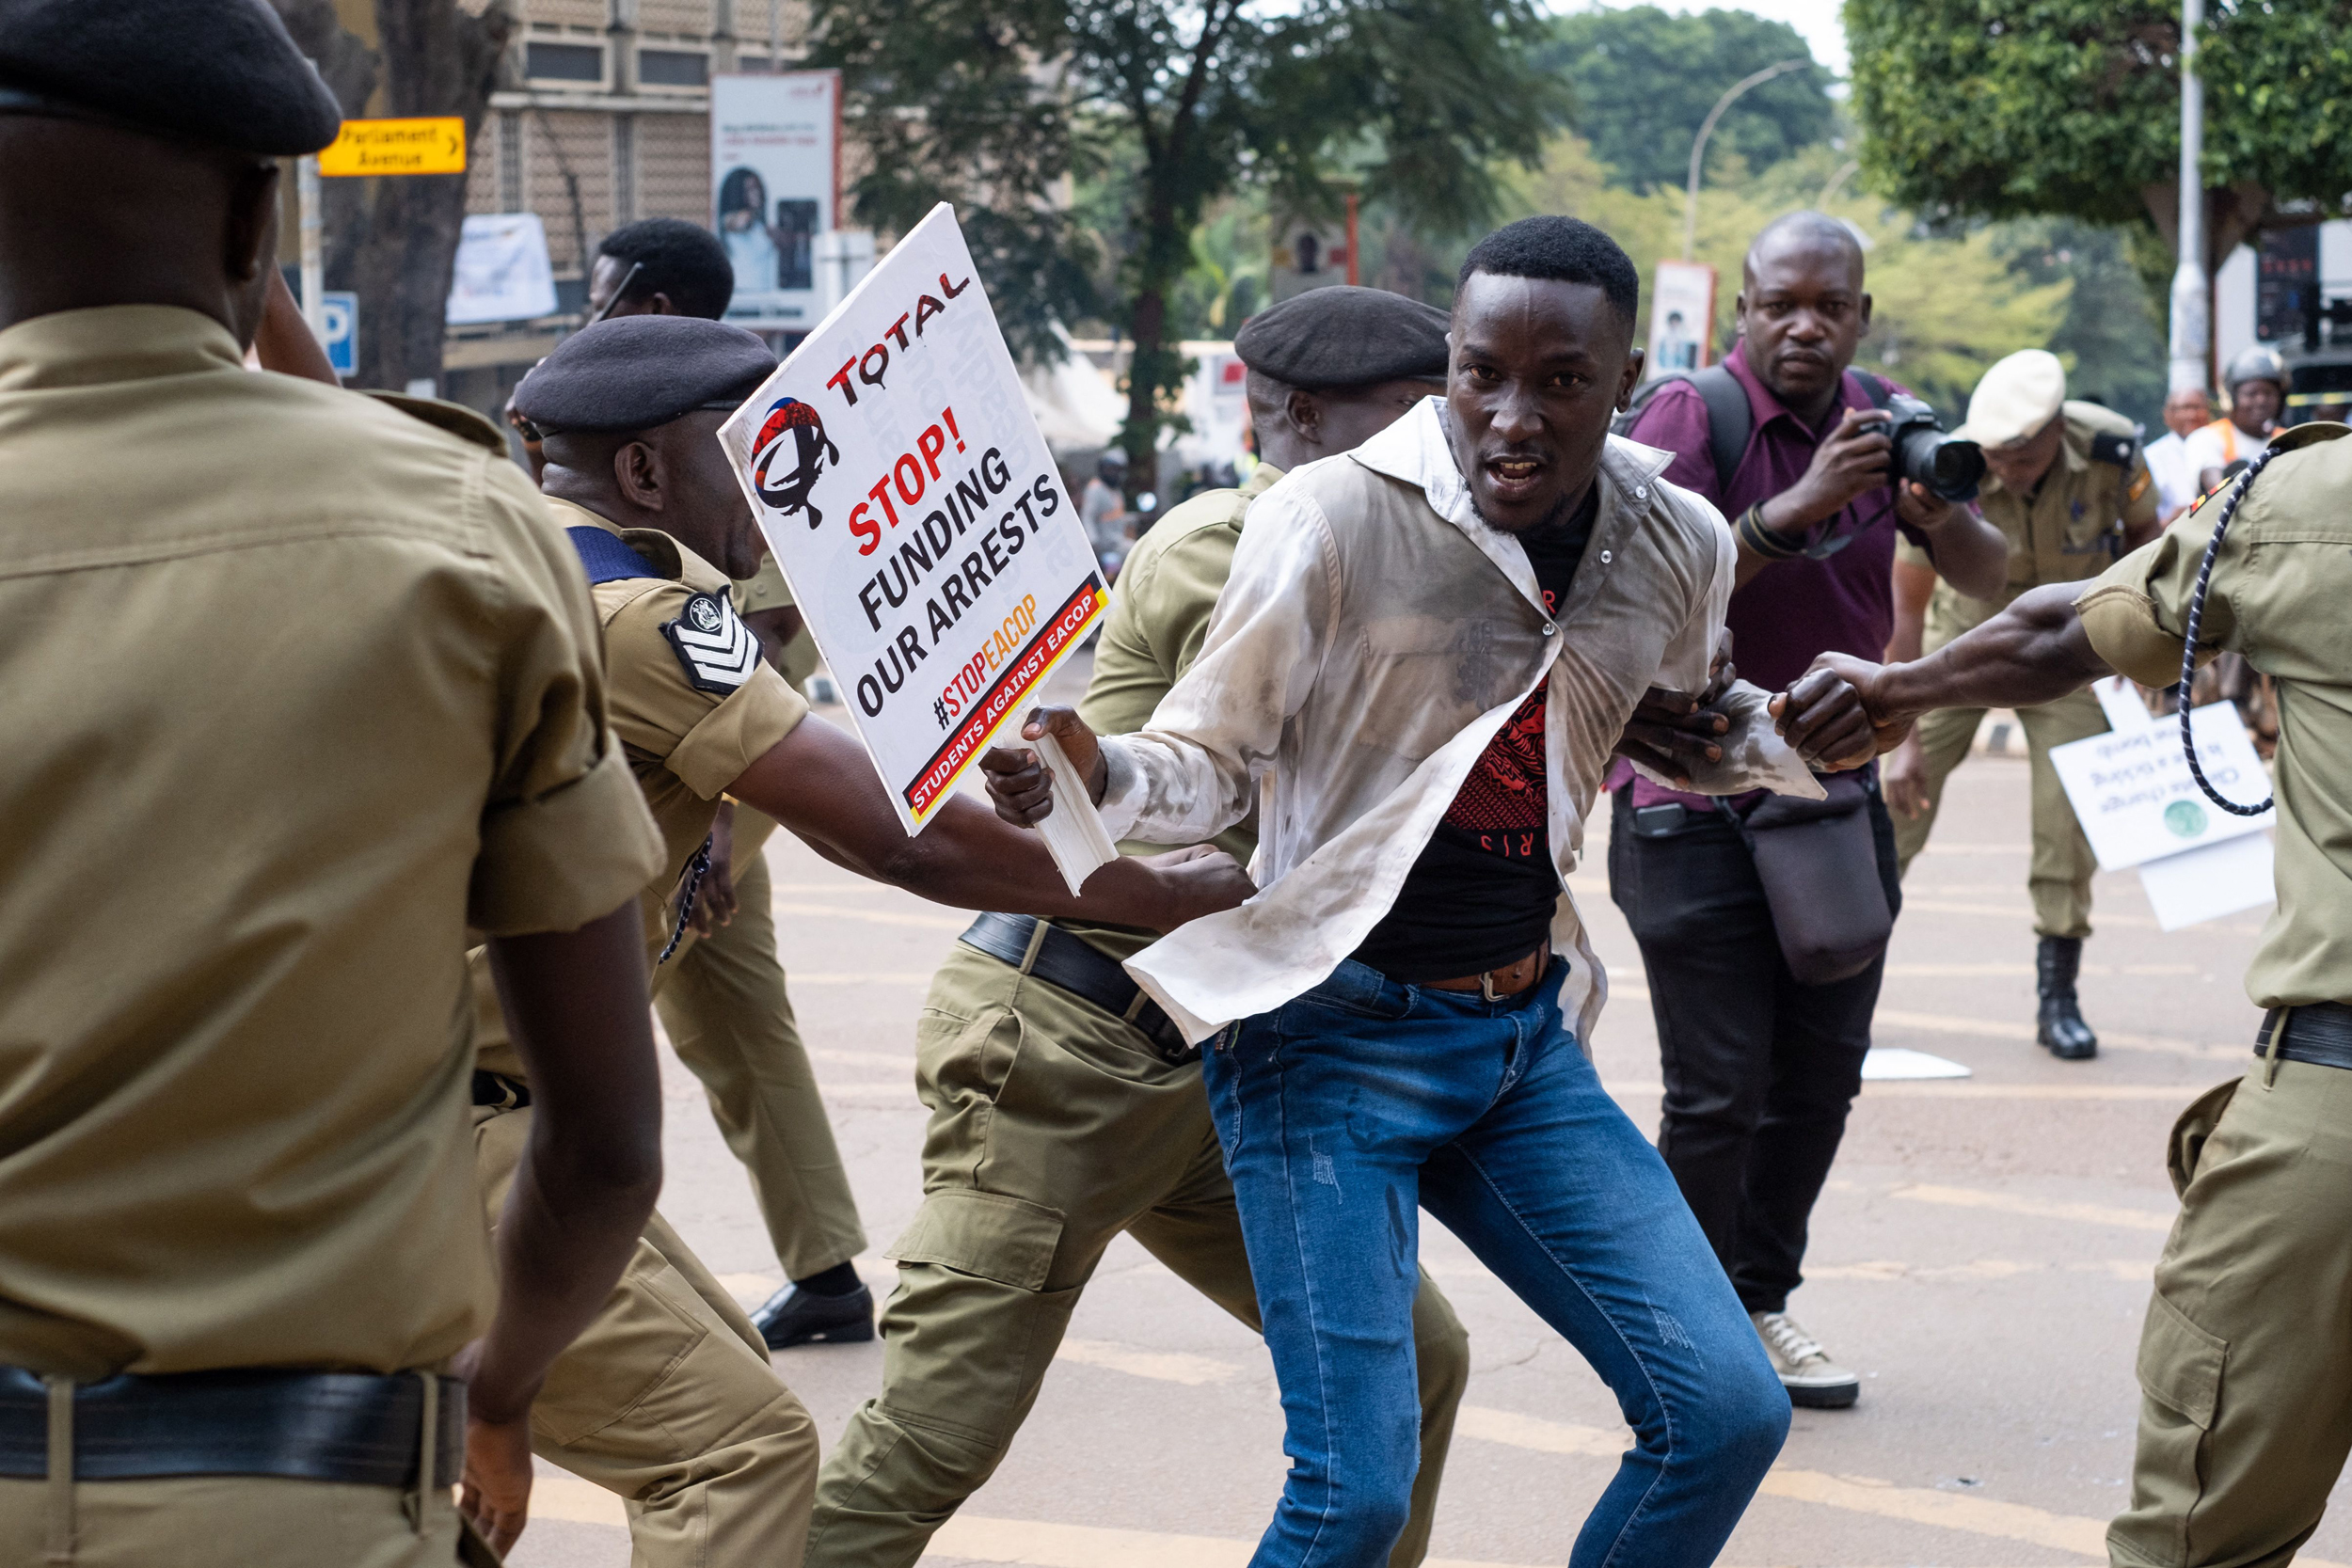 Ugandan police officers arrest an environmental activist in front of the Parliament of Uganda during a protest against the East African Crude Oil Pipeline (EACOP) in Kampala on Sept. 15, 2023. Credit: Badru Katumba/AFP via Getty Images